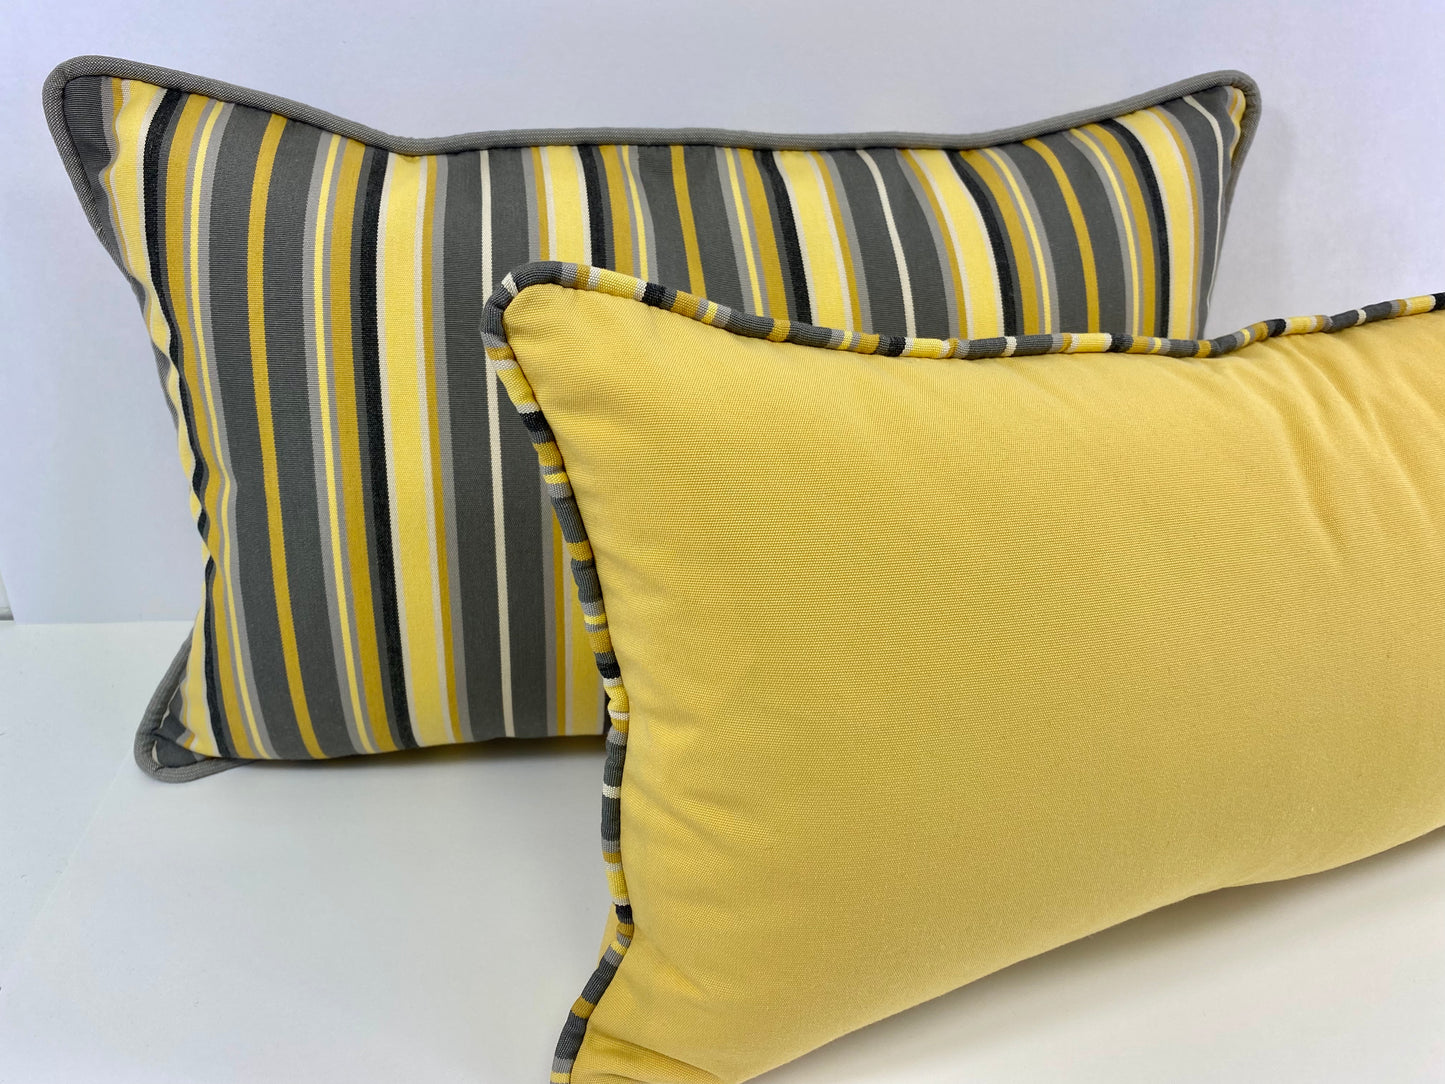 Luxury Outdoor Pillow - 22" x 22" - Seville Juice; Sunbrella, or equivalent, fabric with fiber fill